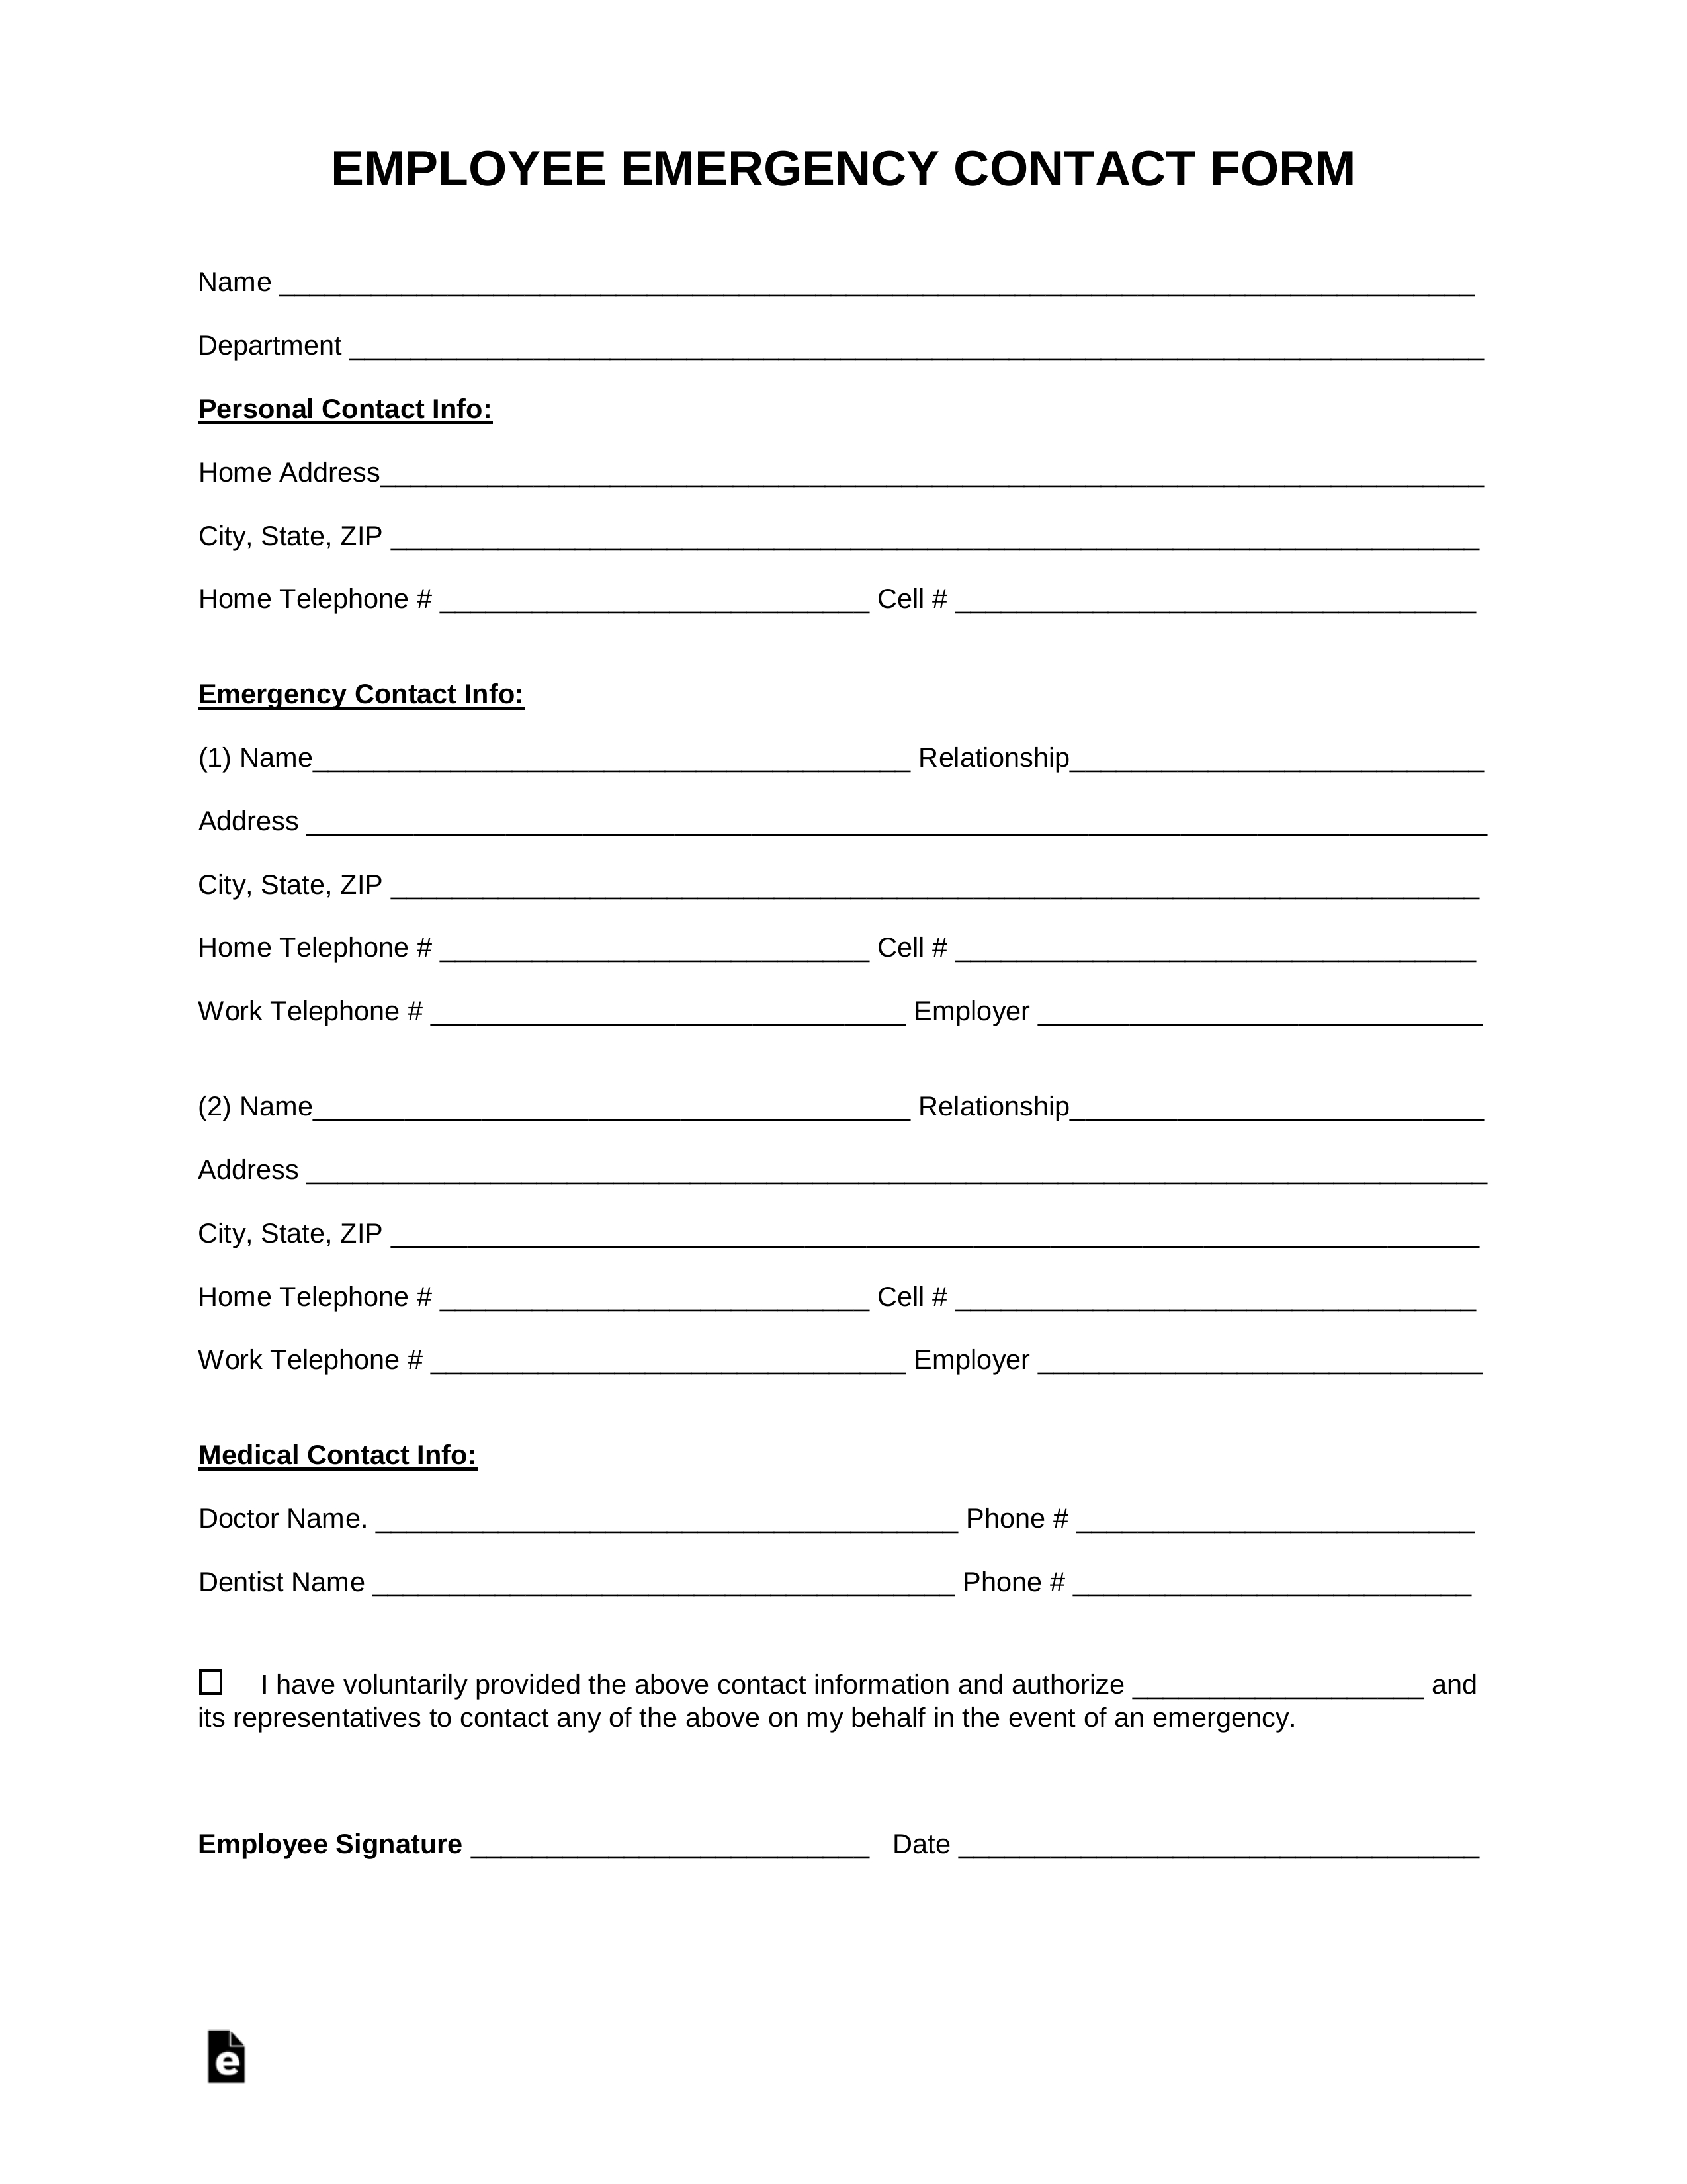 Free Employee Emergency Contact Form – Pdf | Word | Eforms Pertaining To Emergency Contact Card Template